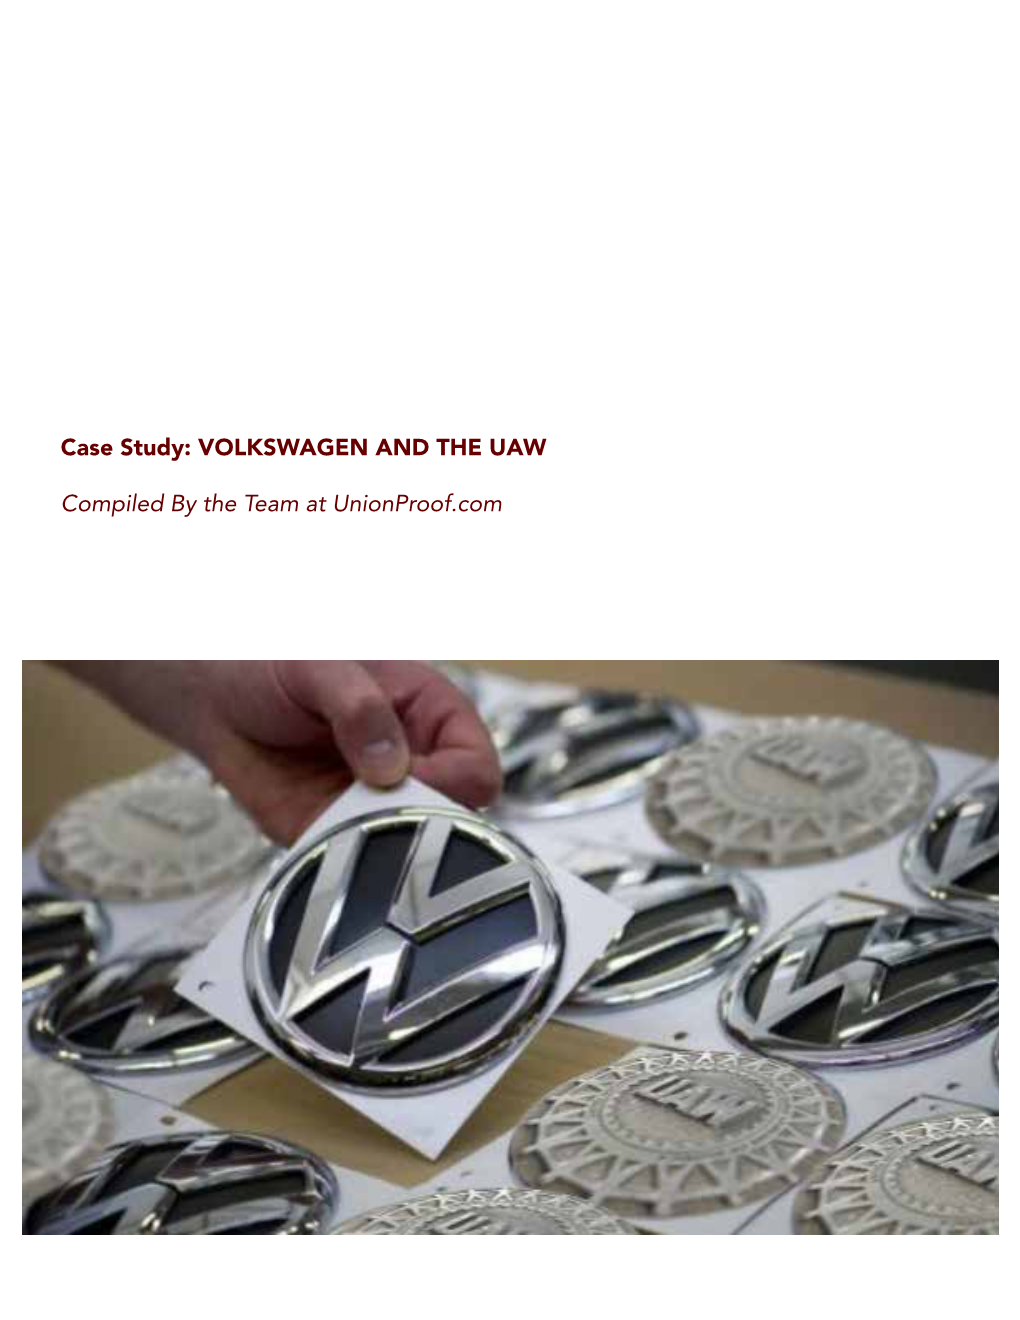 Case Study: VOLKSWAGEN and the UAW Compiled by the Team At